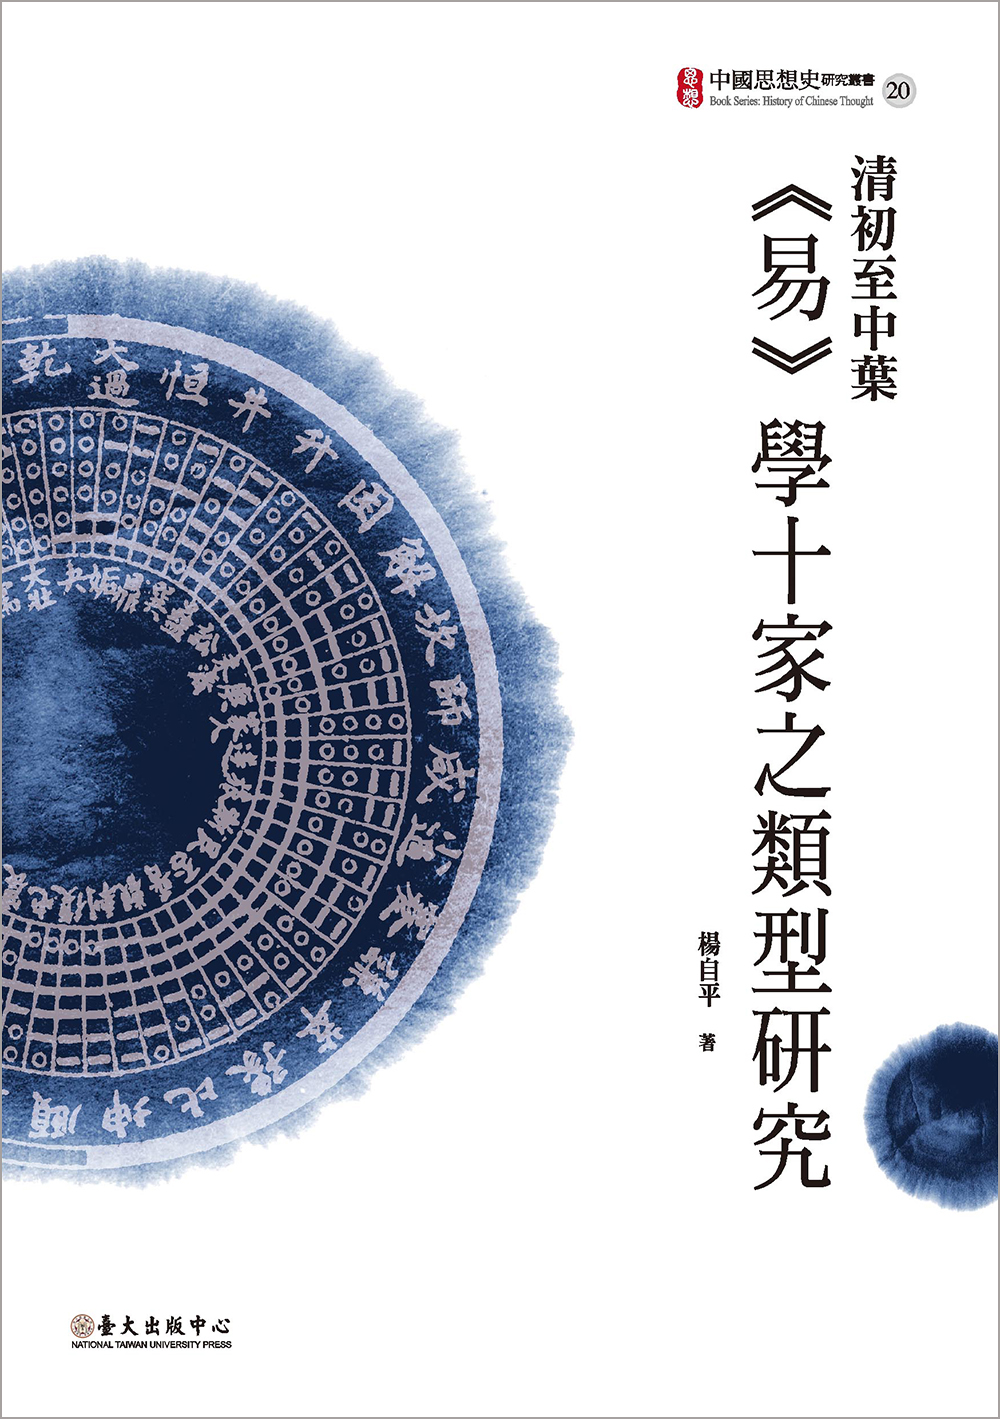 Research on Ten Schools' Different Interpretative Models of Early and Middle Period of Qing Dynasty in I Ching